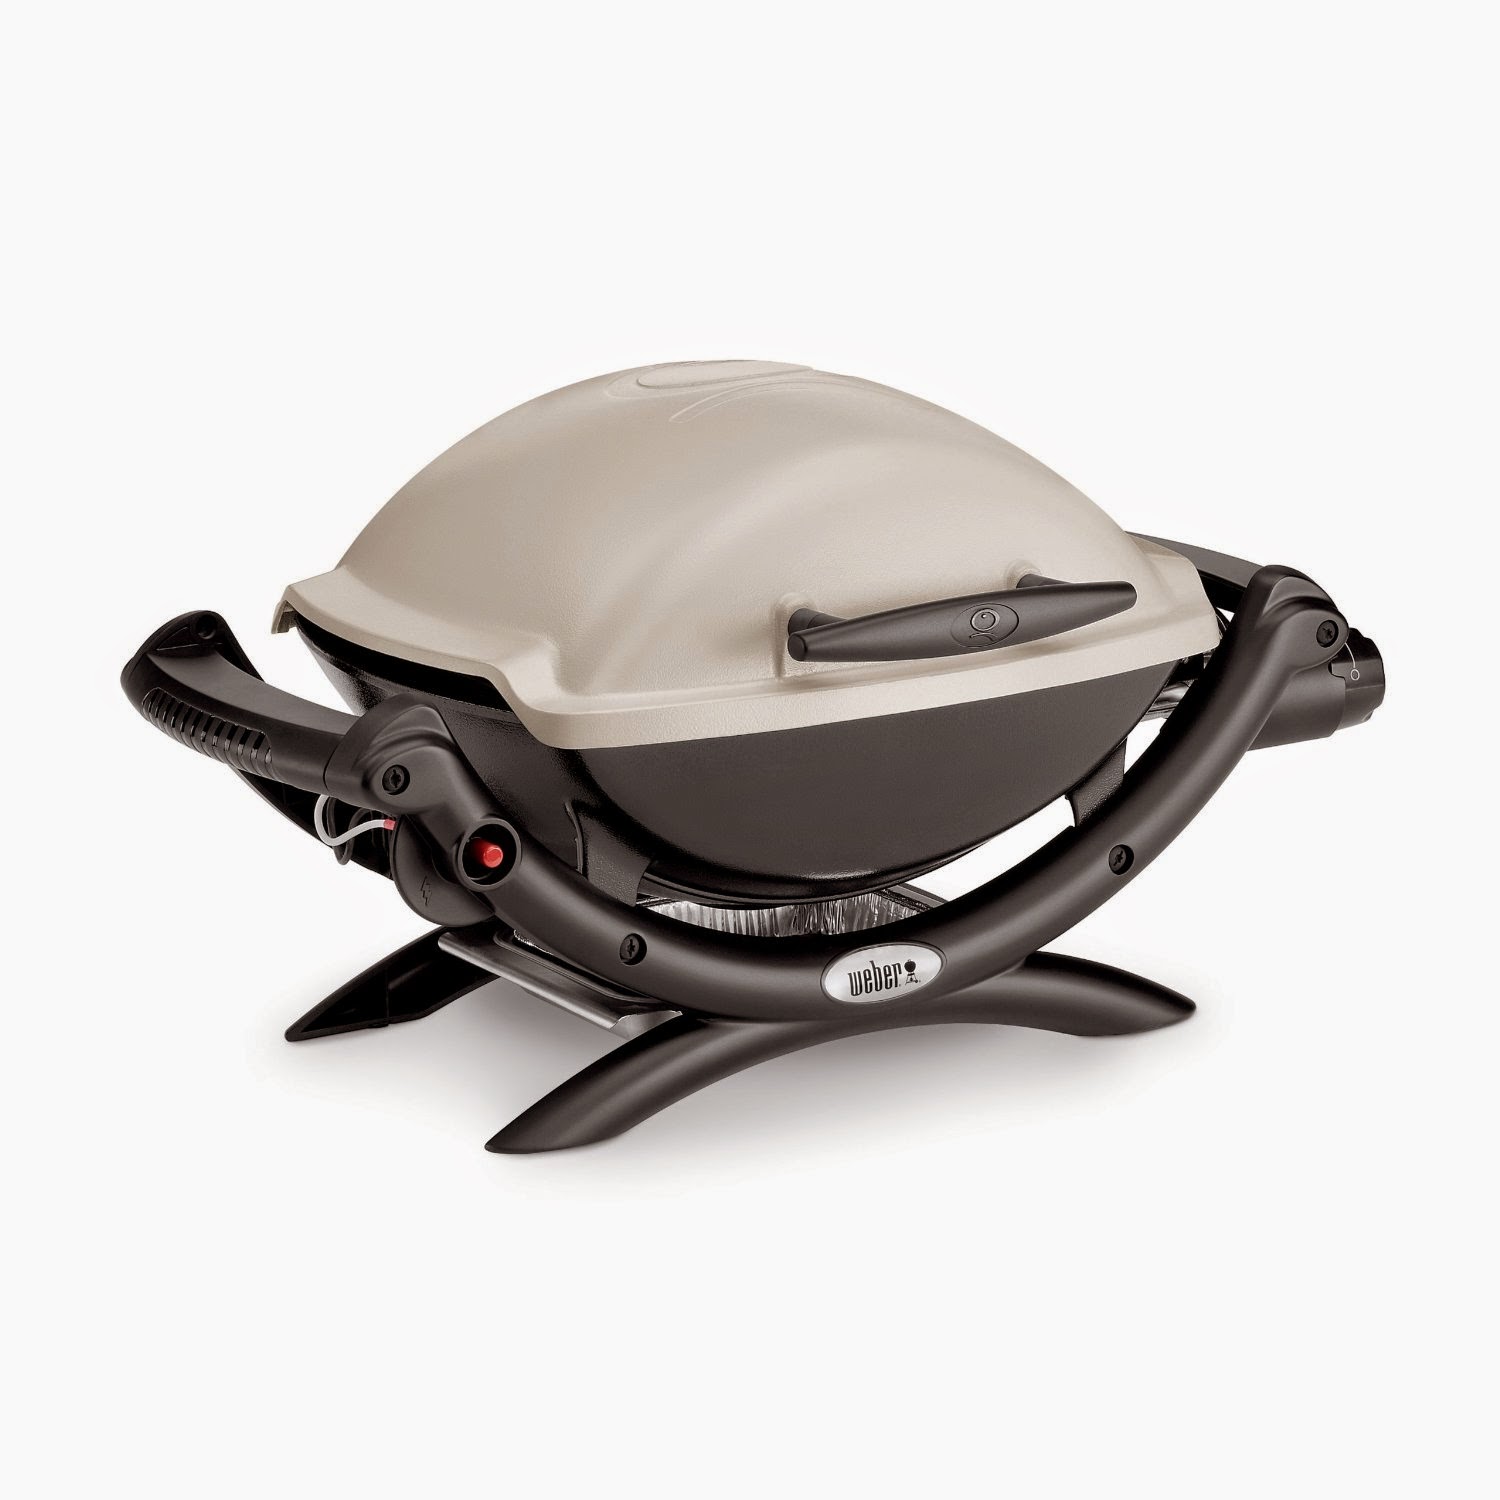 Portable Gas Grill, easily fit into the trunk of your car to take camping or on a picnic